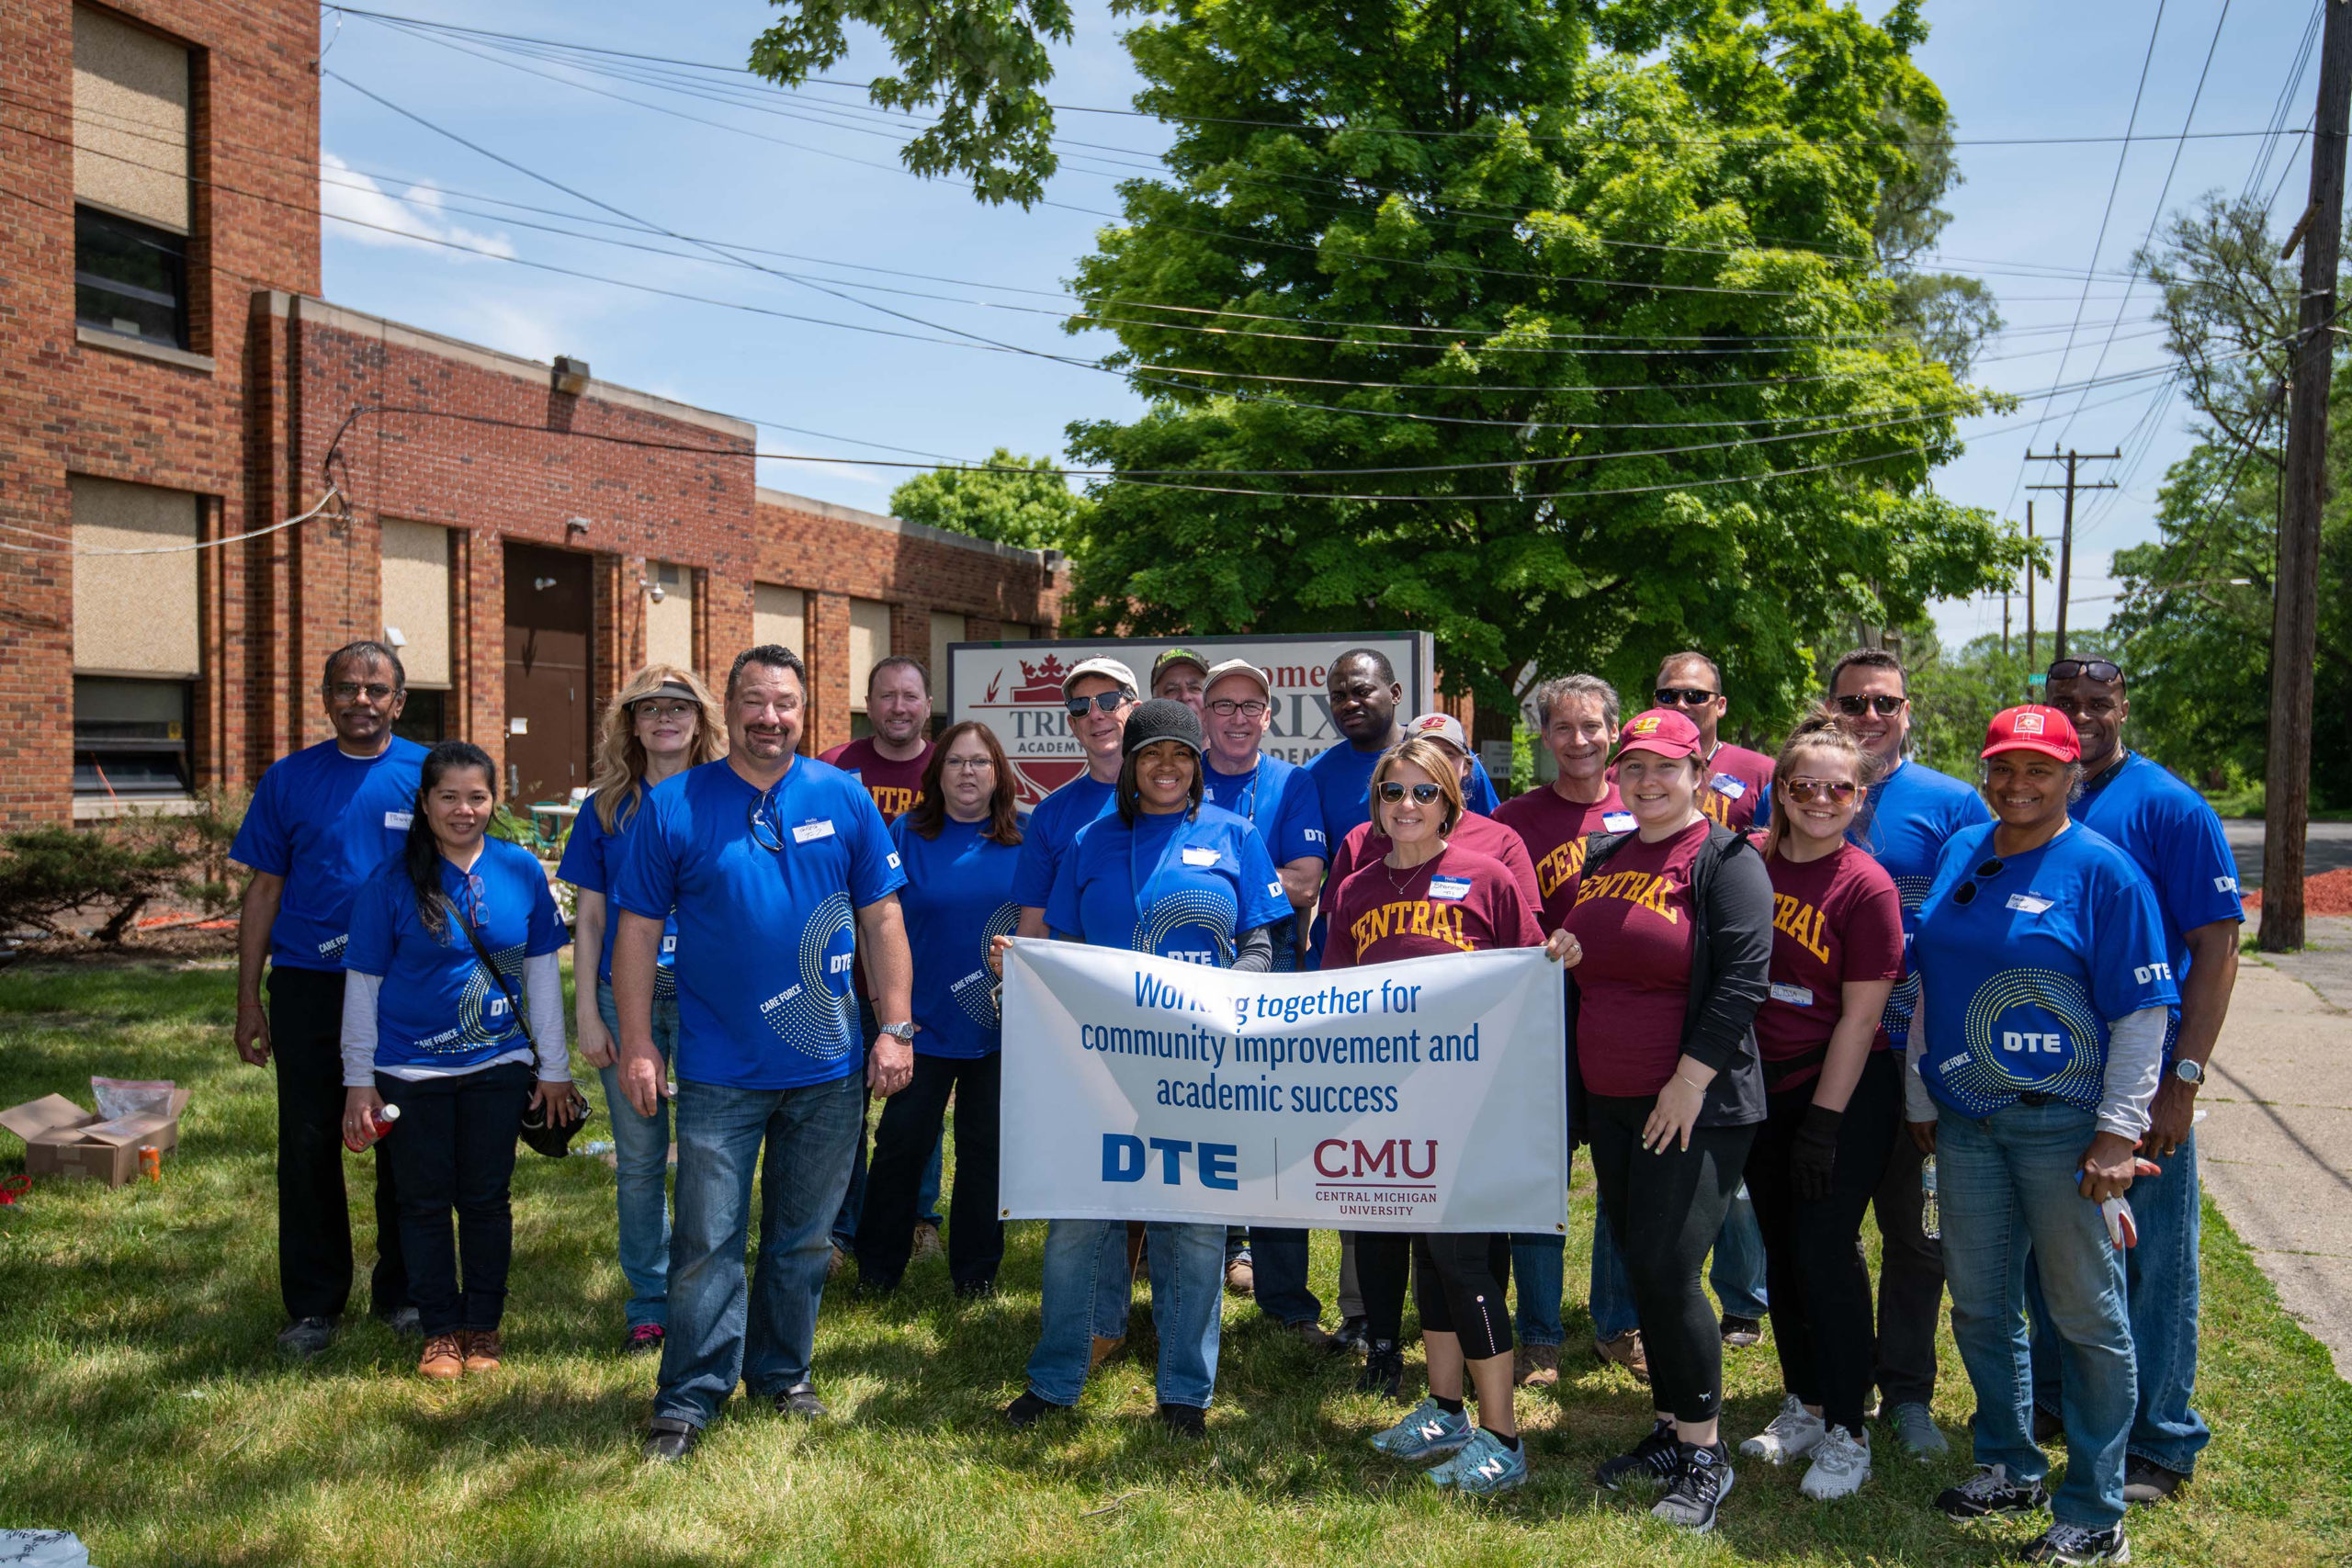 Volunteers from DTE Energy' Major Enterprise Projects (MEP) and CMU (Central Michigan University) work on installing new landscape at Trix Academy inn Detroit.